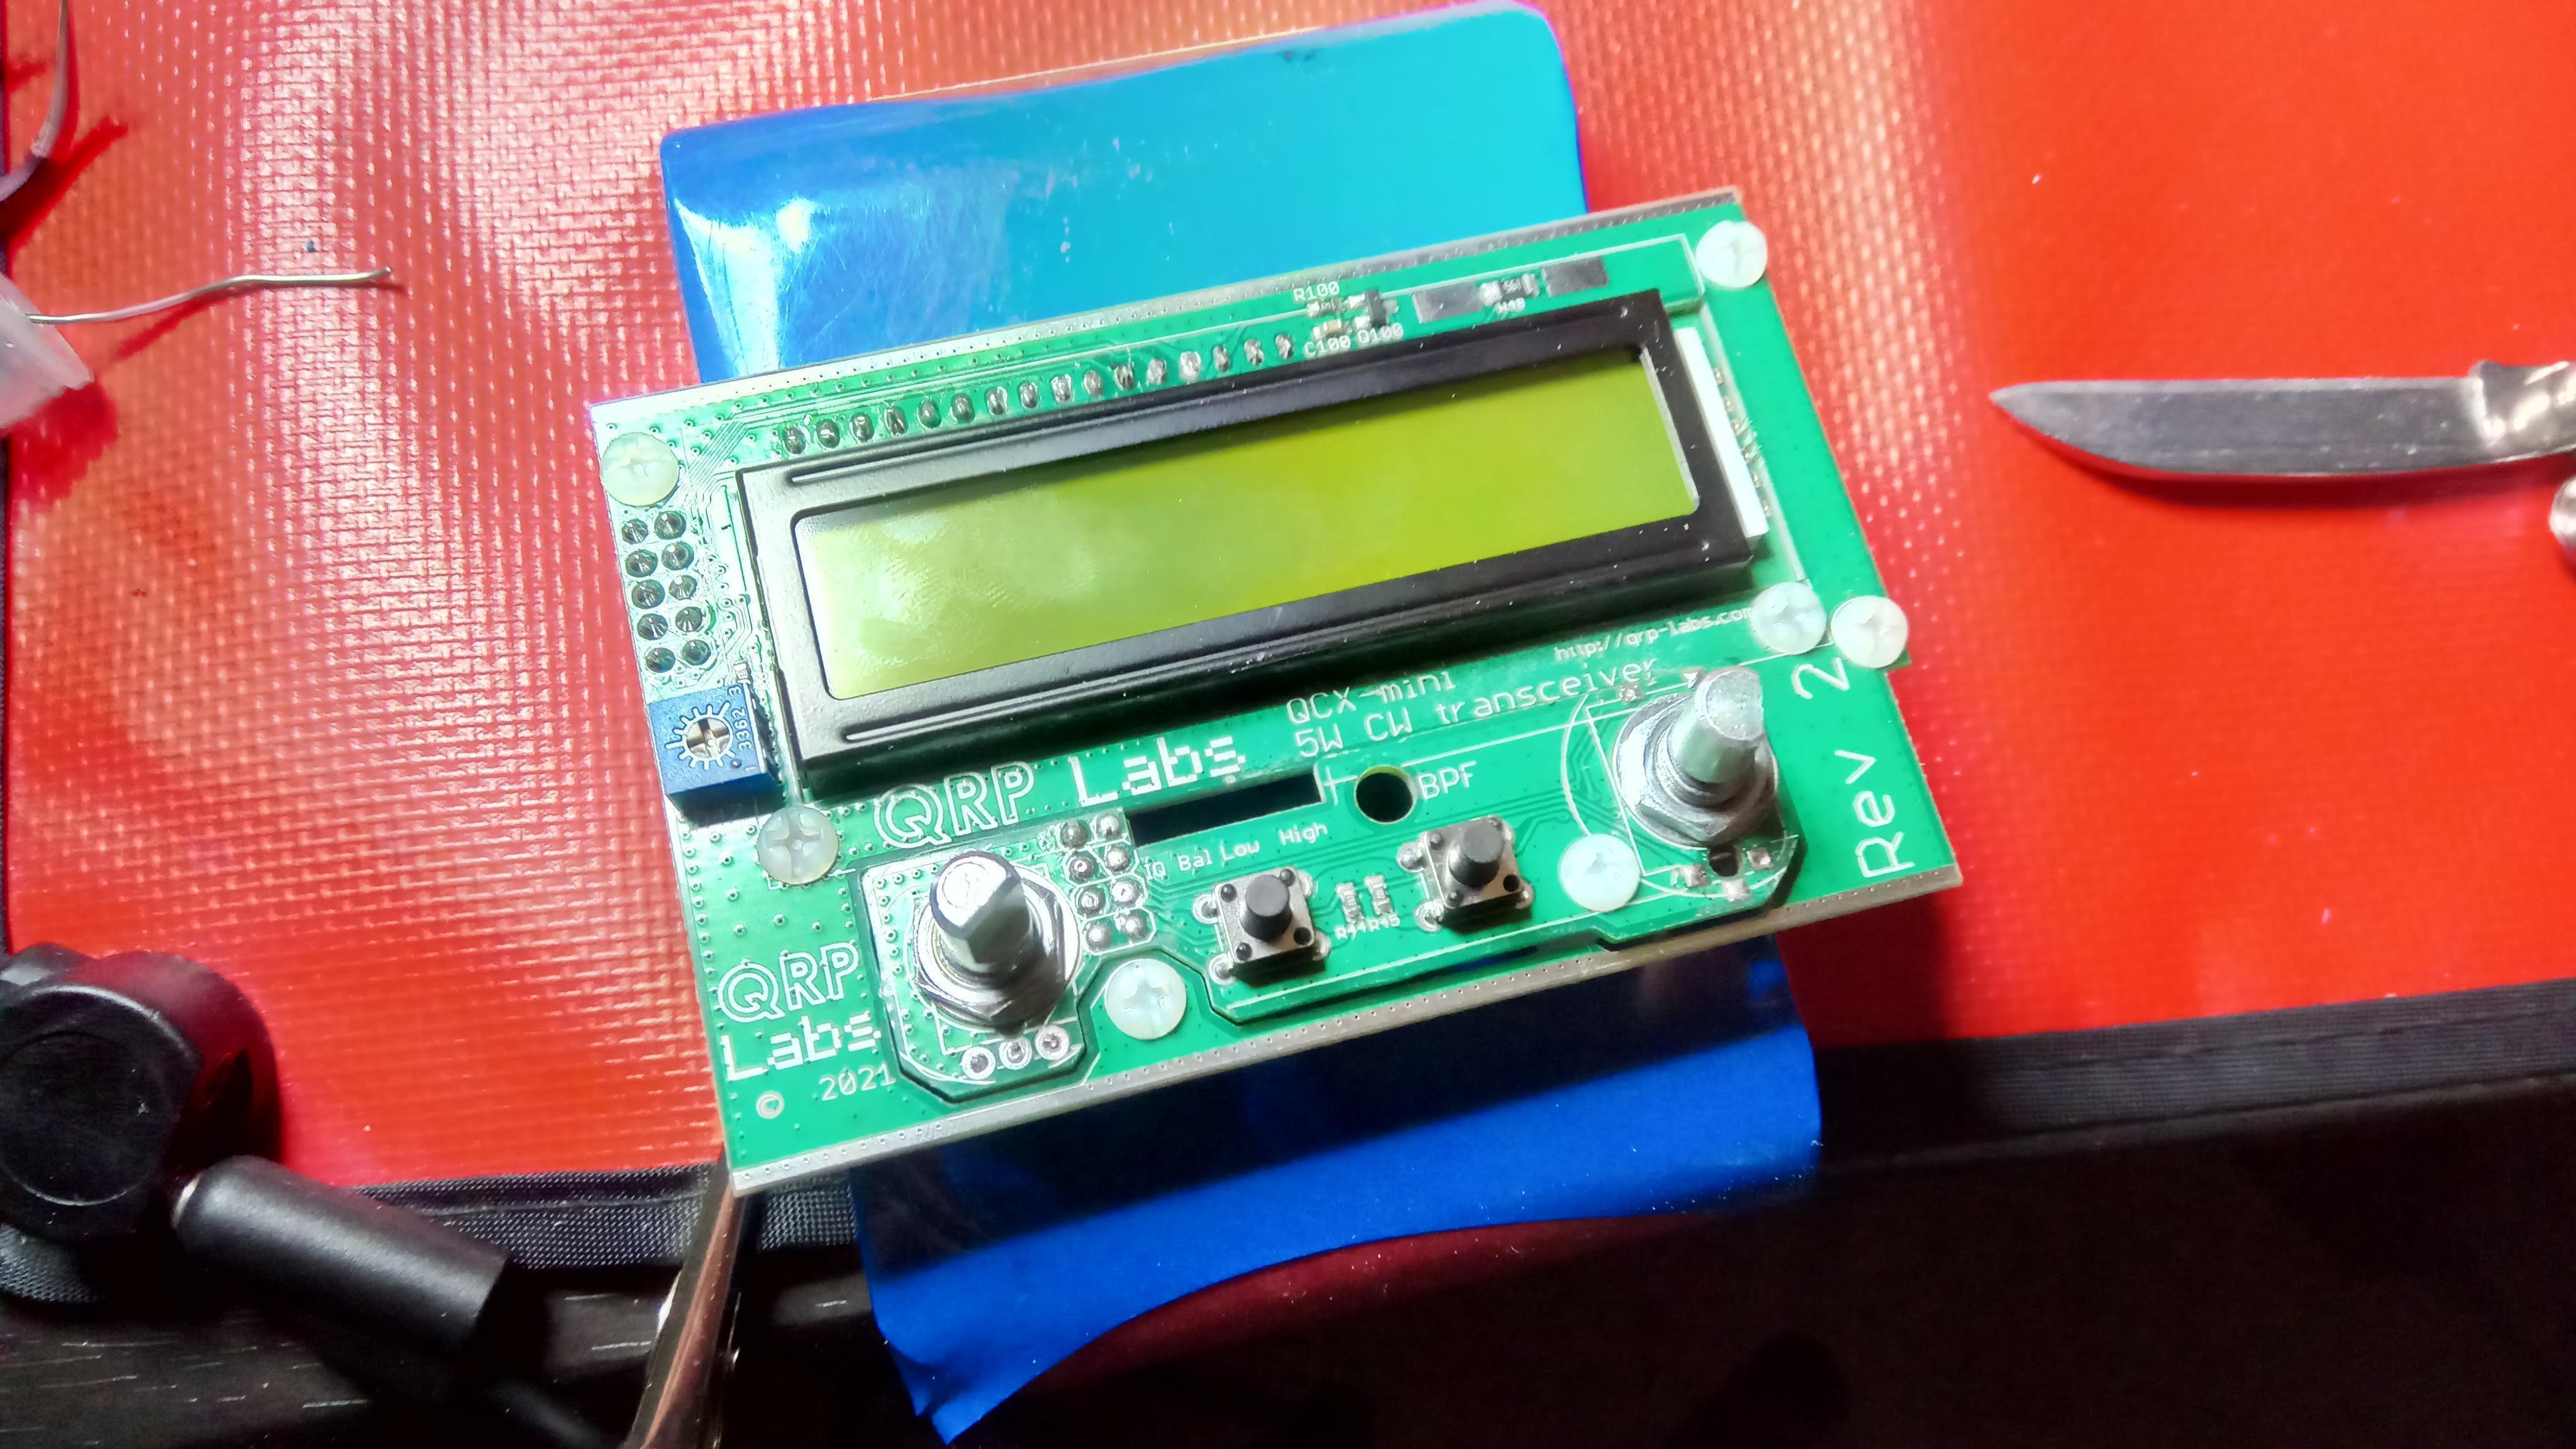 Make sure control board squeezes through the hole in the display board